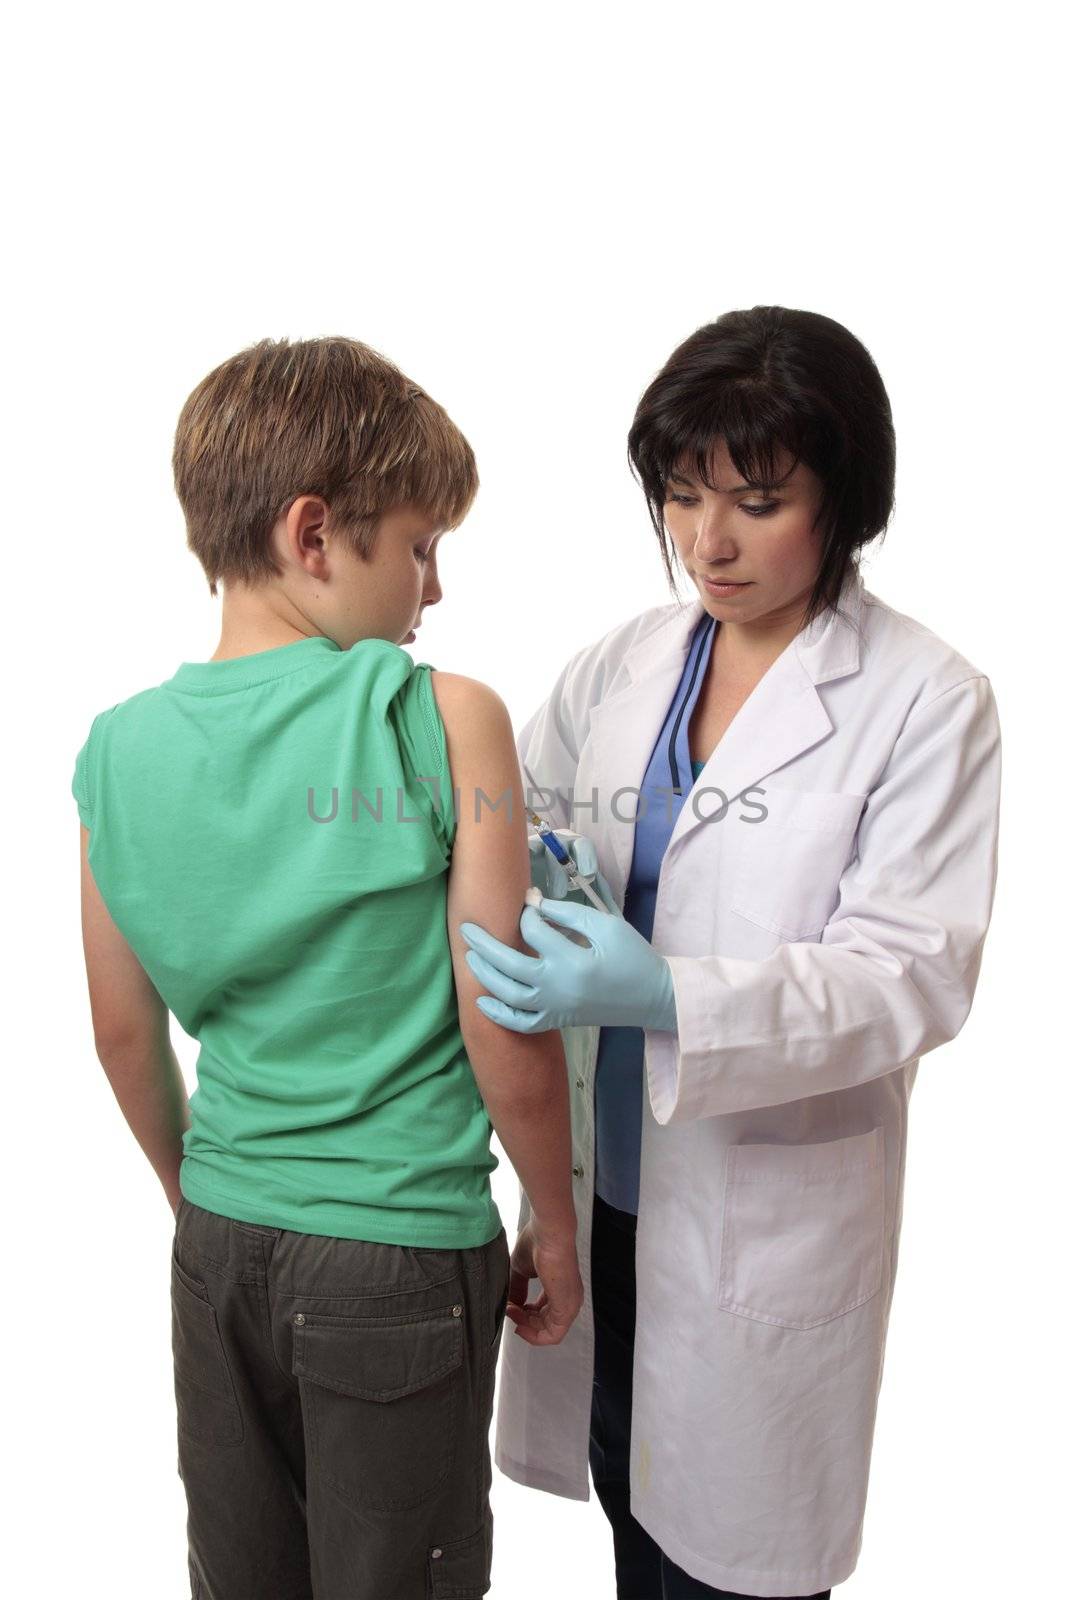 A child receives a vaccination from a doctor